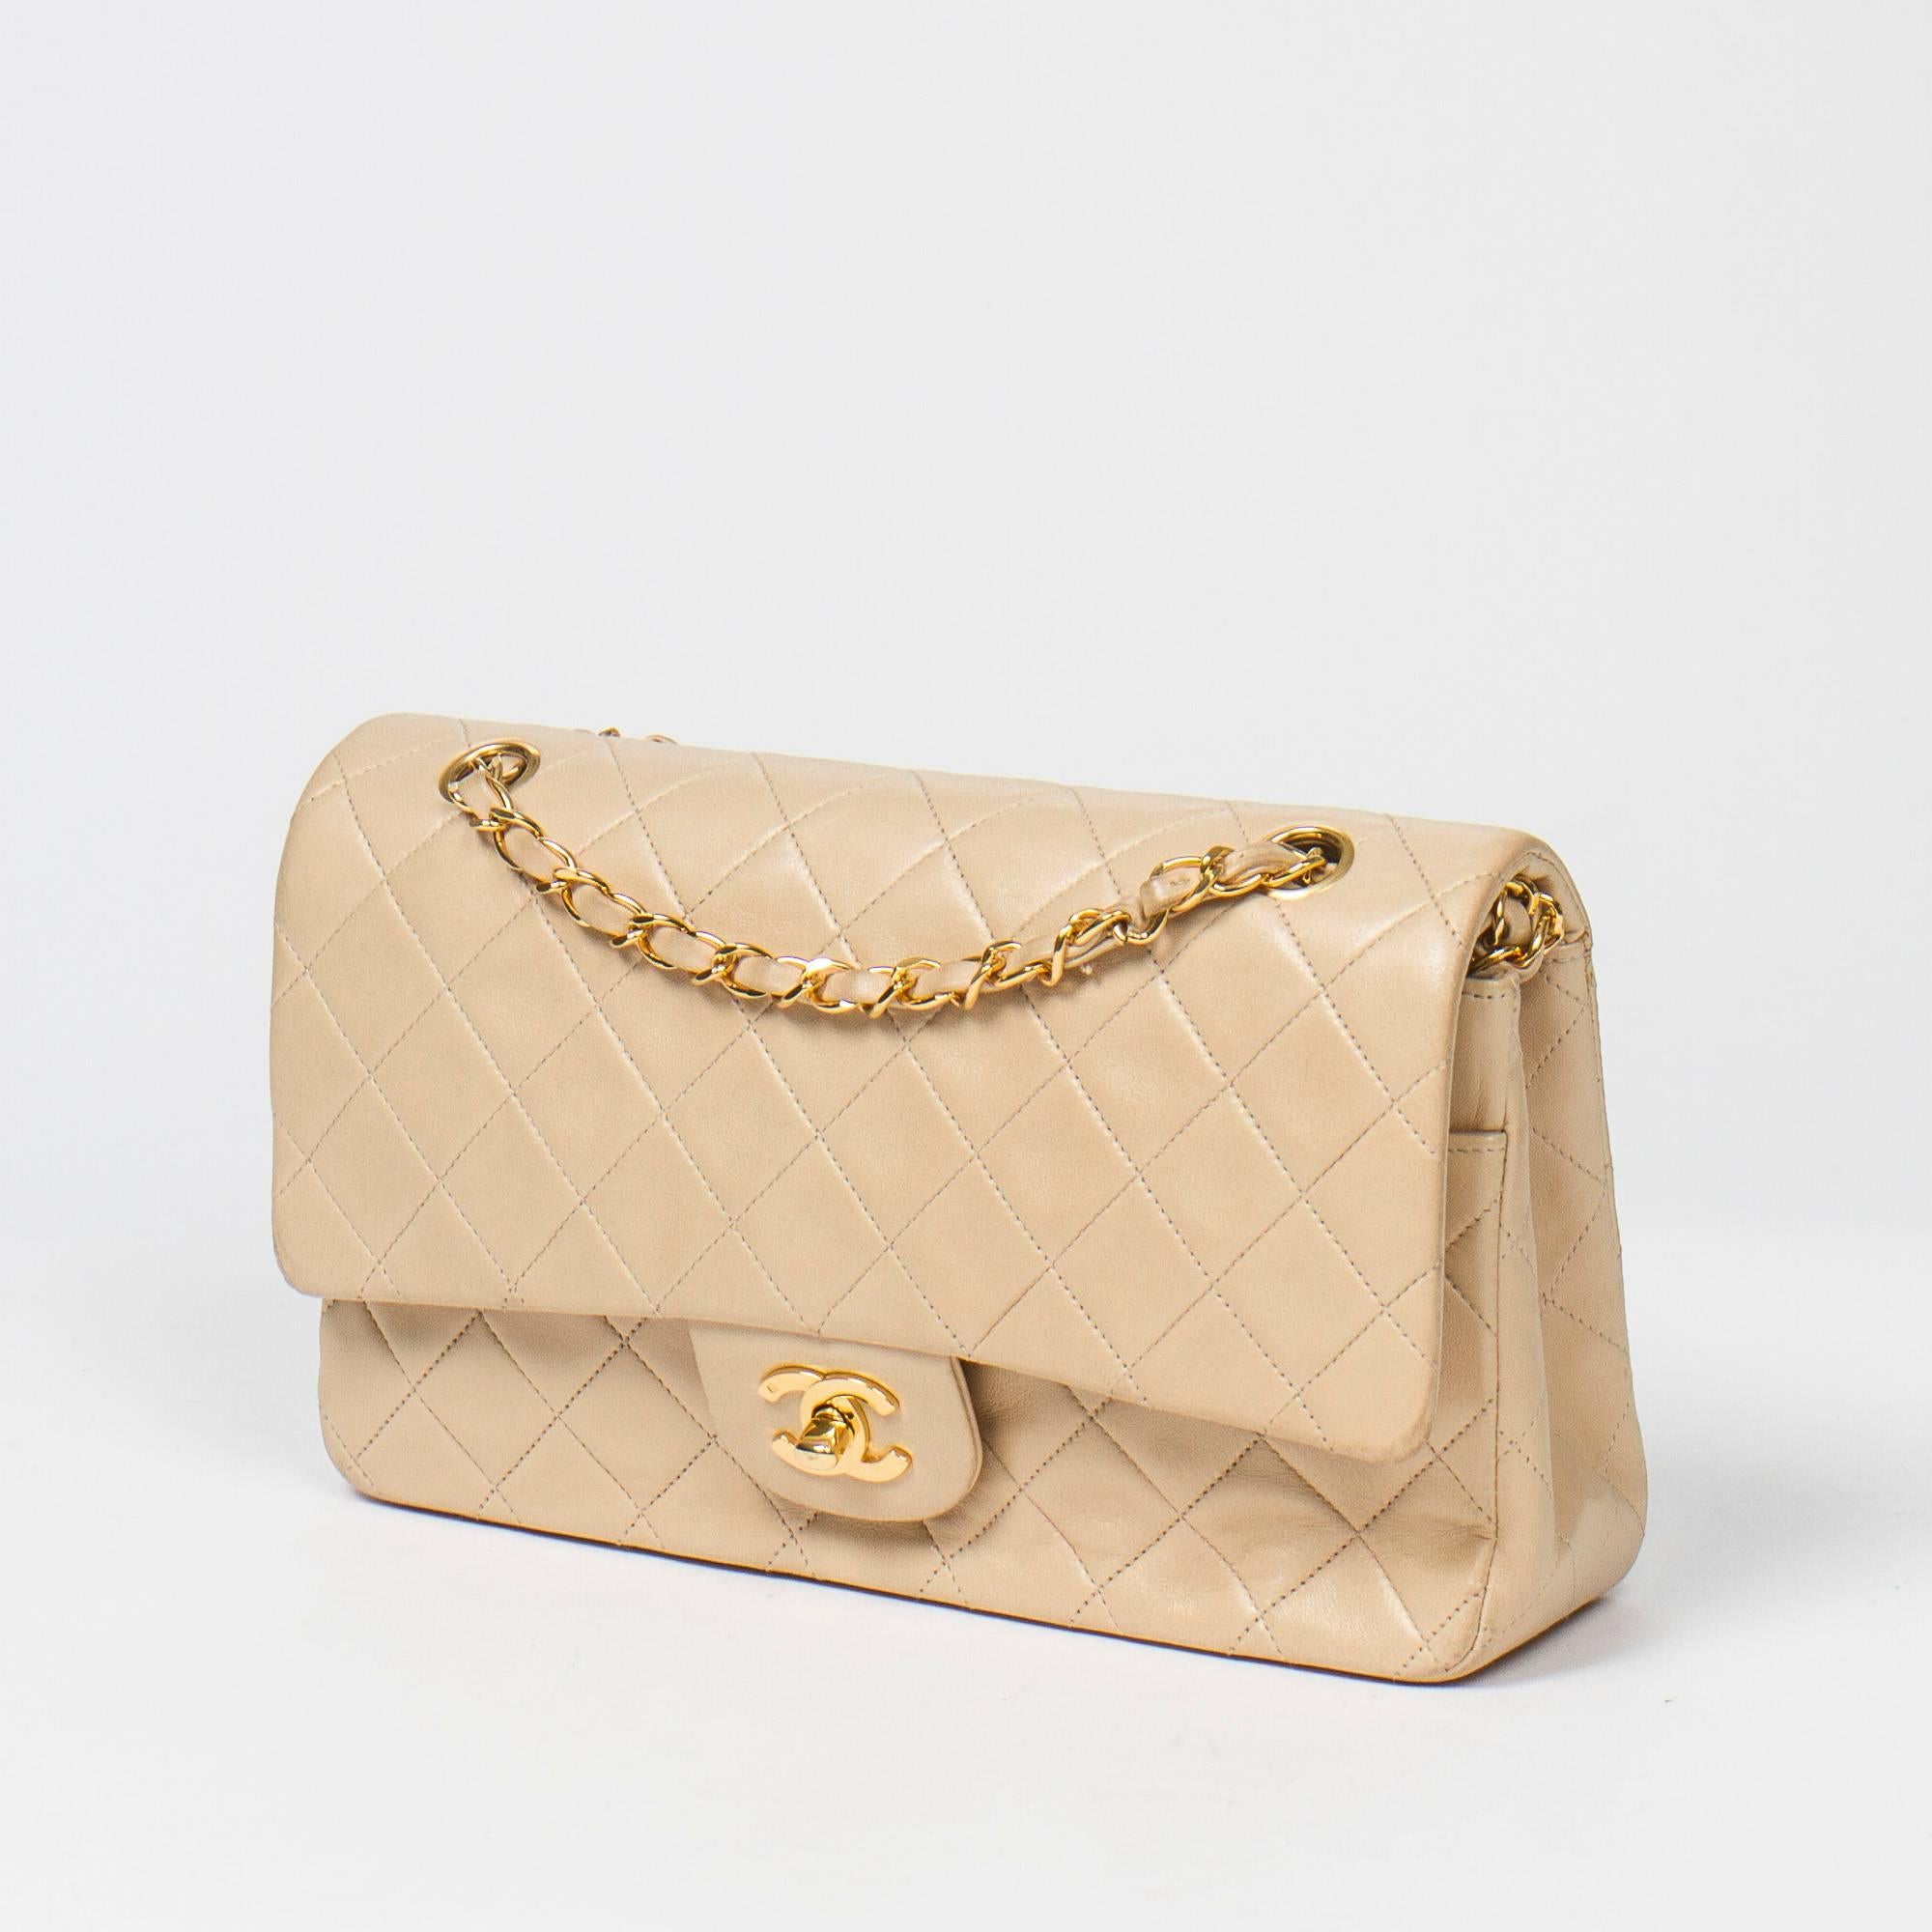 Classic Double Flap 26 in beige quilted calf leather, double chain strap interlaced with leather, signature turnlock closure, gold tone hardware. Back slip pocket. Beige leather lined interior with 3 slip pockets. Gold tone heat stamp 